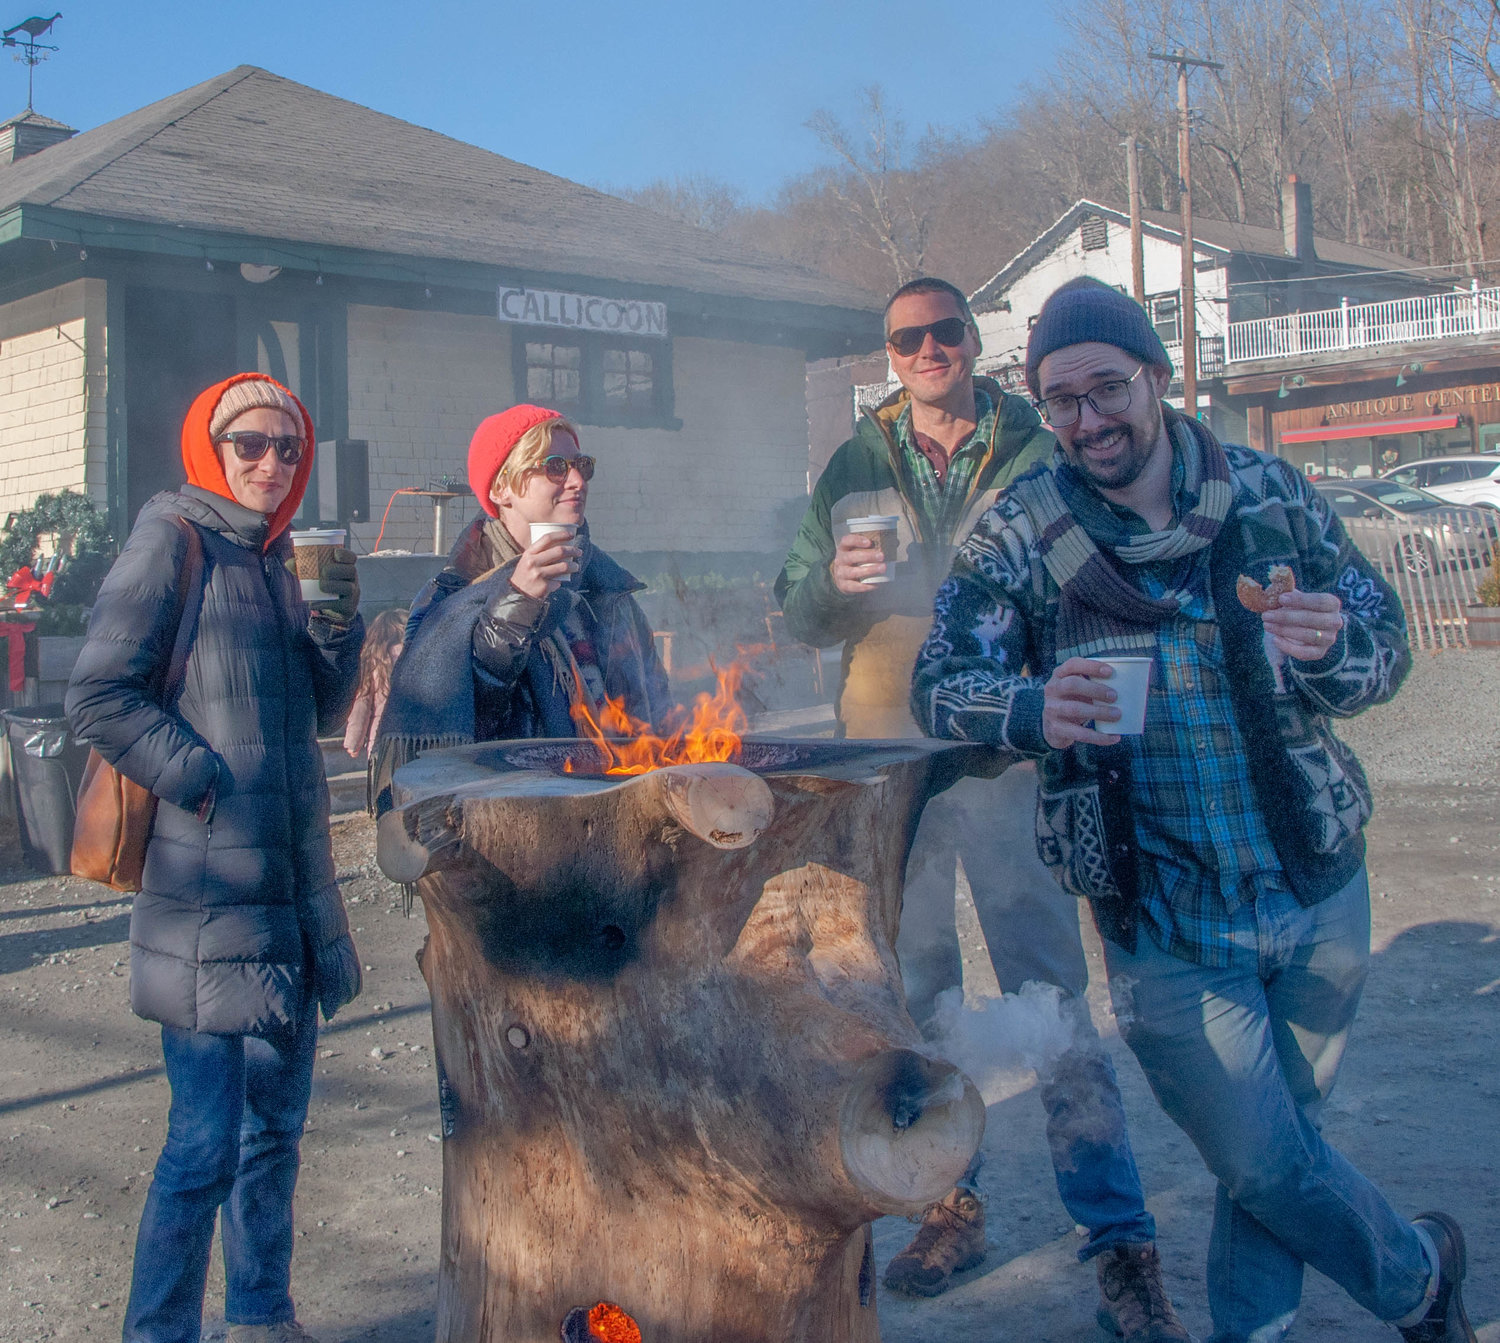 I schmoozed and sipped hot chocolate 'round the fire with Valerie, Matt, Ashley and Mike (don't ask me who was who!) at Dickens on the Delaware last weekend in beautiful Callicoon, NY.